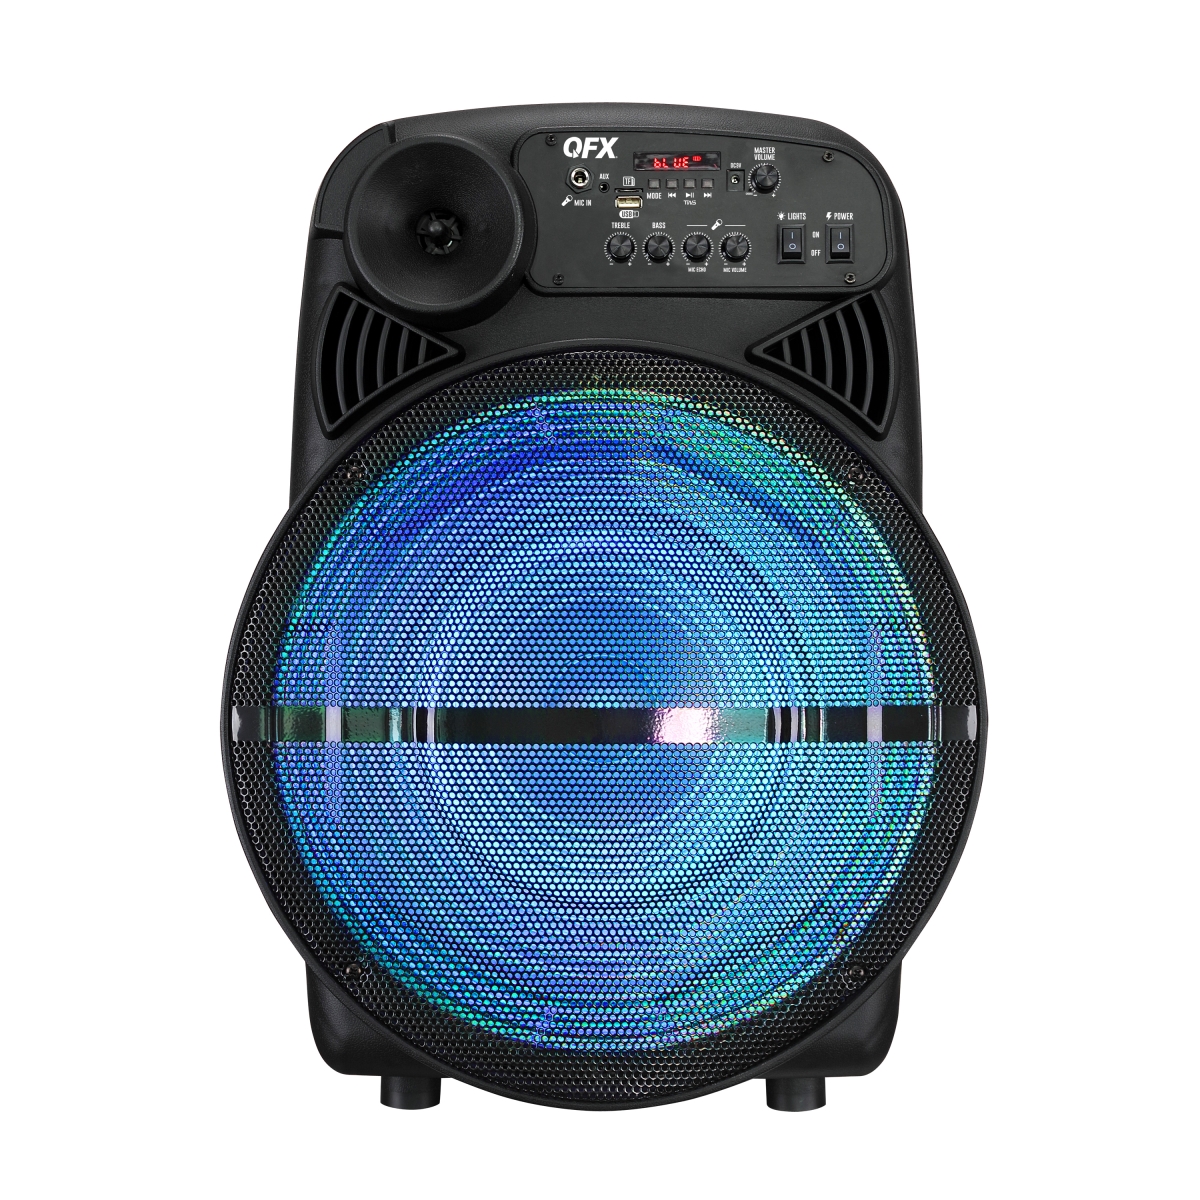 PBX-156 Portable Rechargeable Speaker with LED Party Lights, Black -  QFX